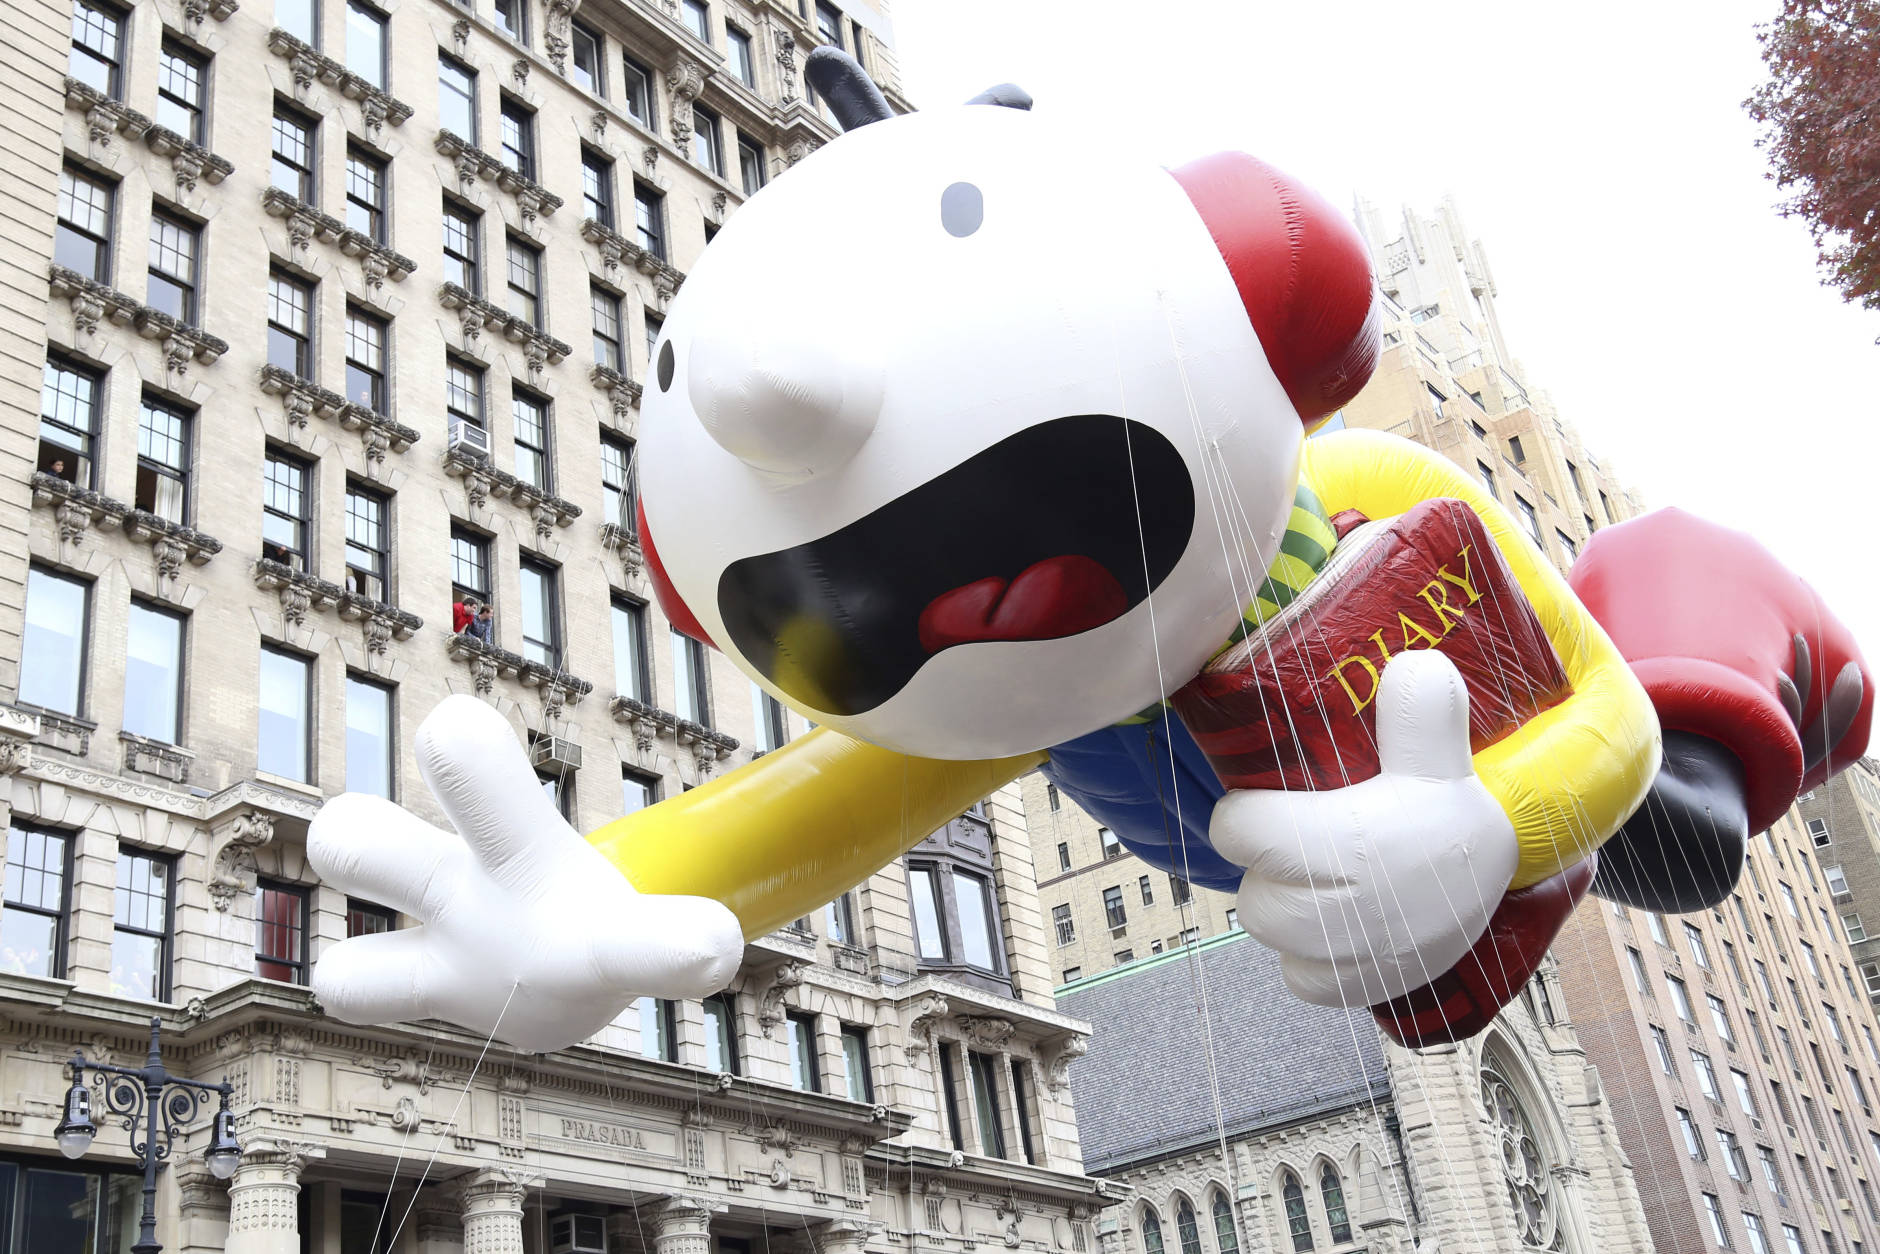 The Diary of a Wimpy Kid balloon floats in the 90th Annual Macy's Thanksgiving Day Parade on Thursday, Nov. 24, 2016, in New York. (Photo by Greg Allen/Invision/AP)